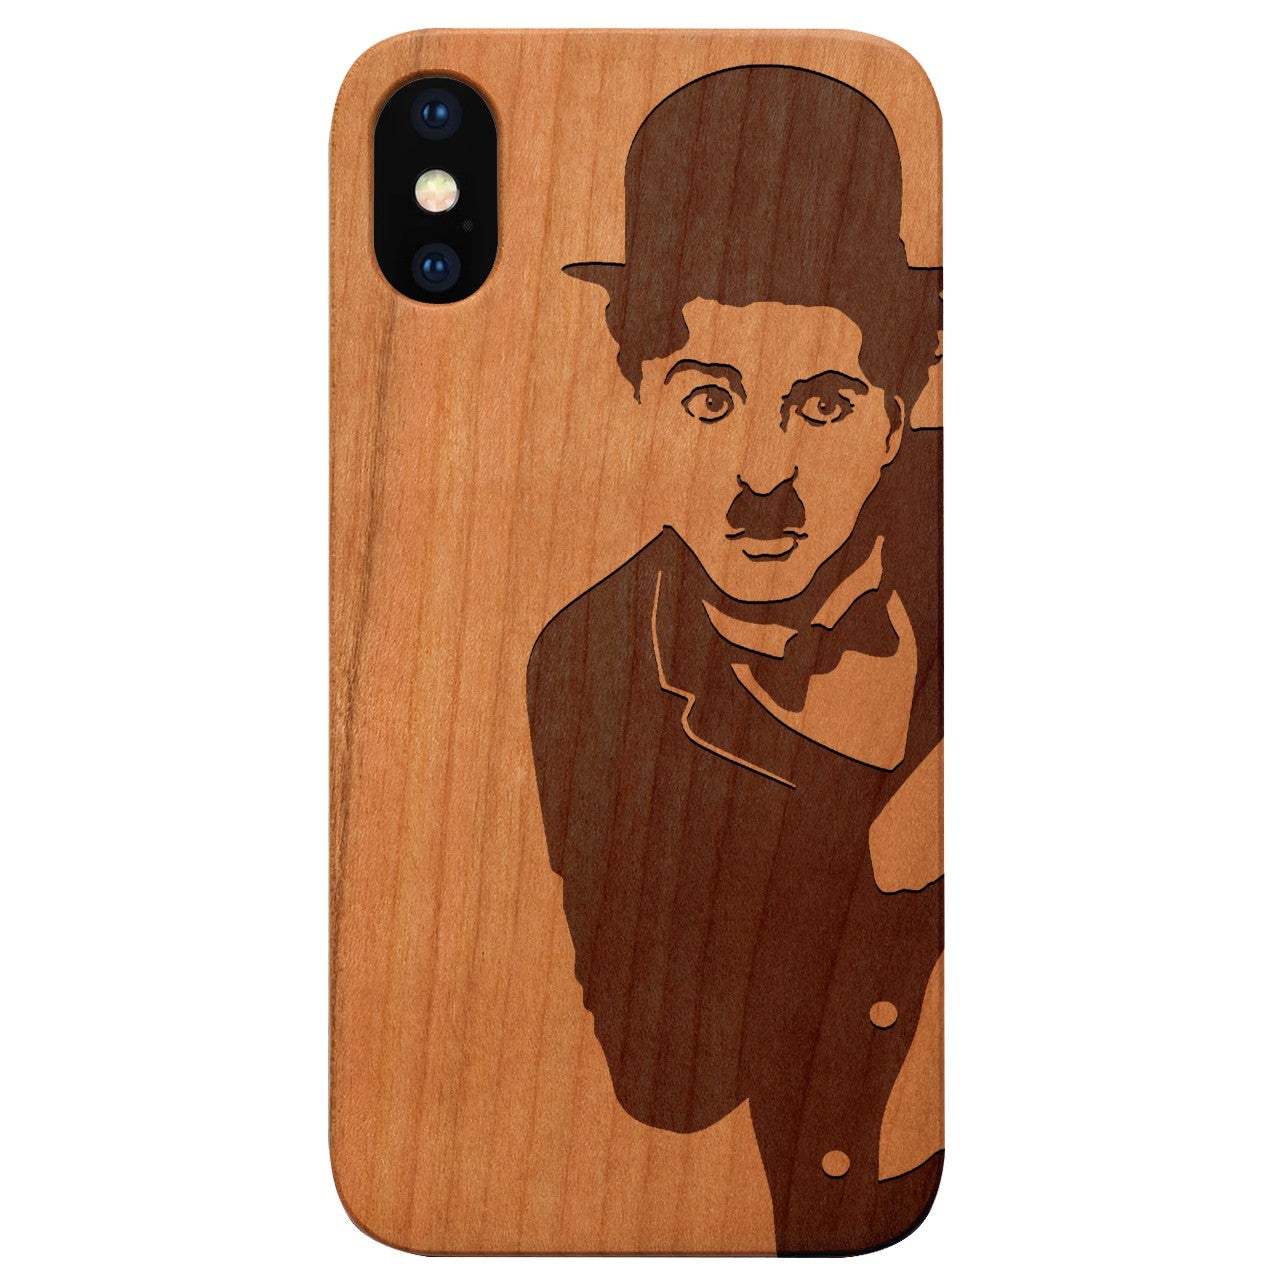  Charlie Chaplin 2 - Engraved - Wooden Phone Case - IPhone 13 Models